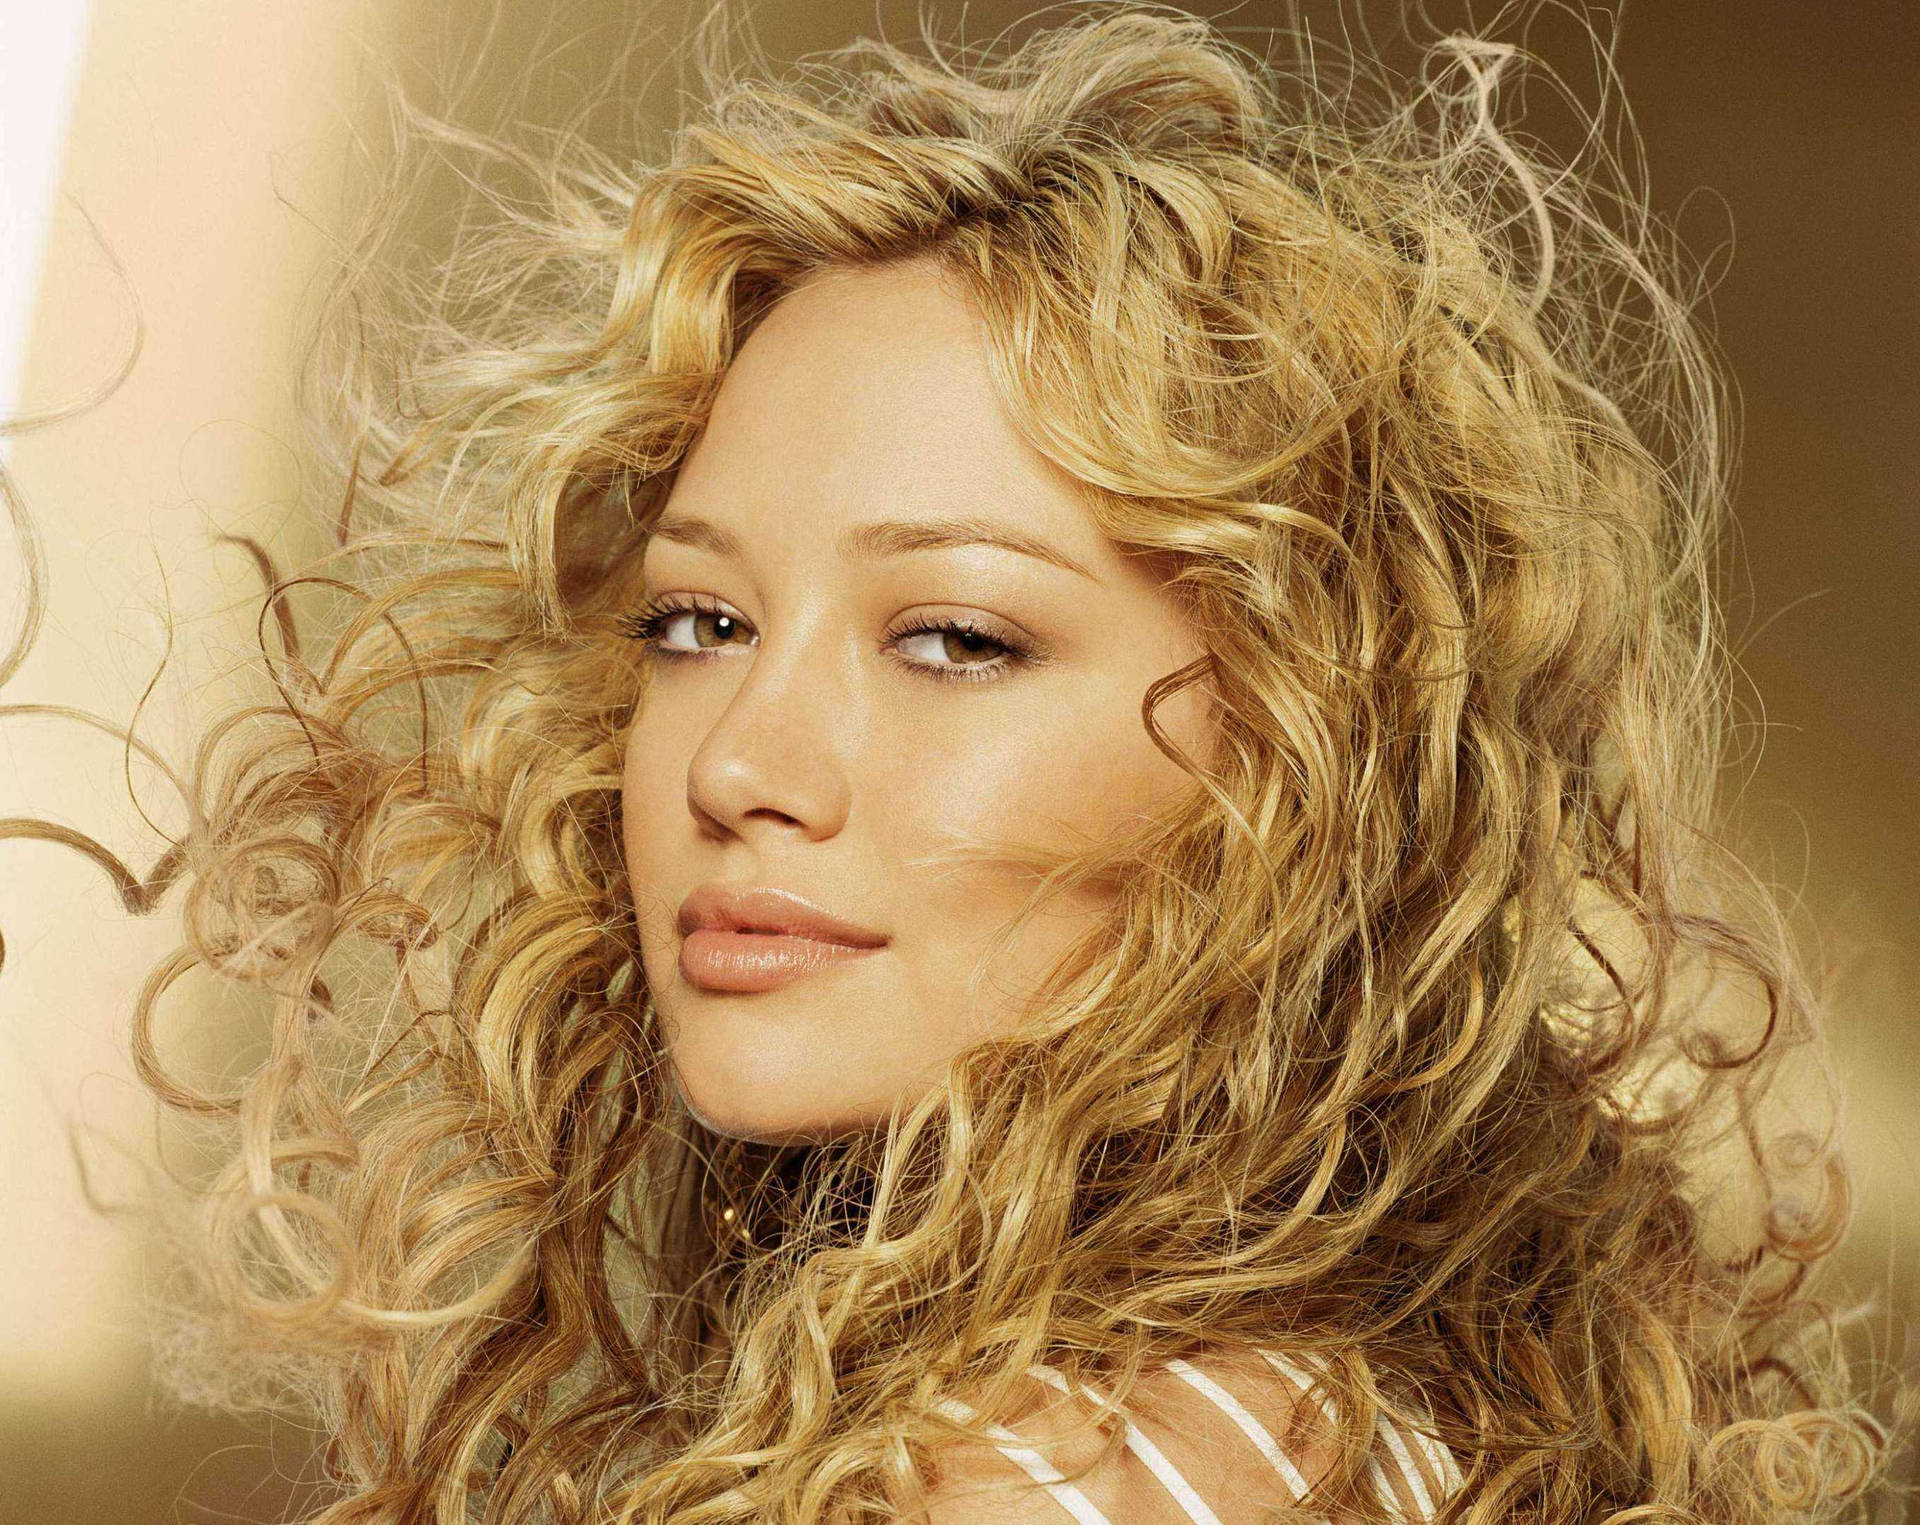 Hilary Duff With Flowing Hair Background